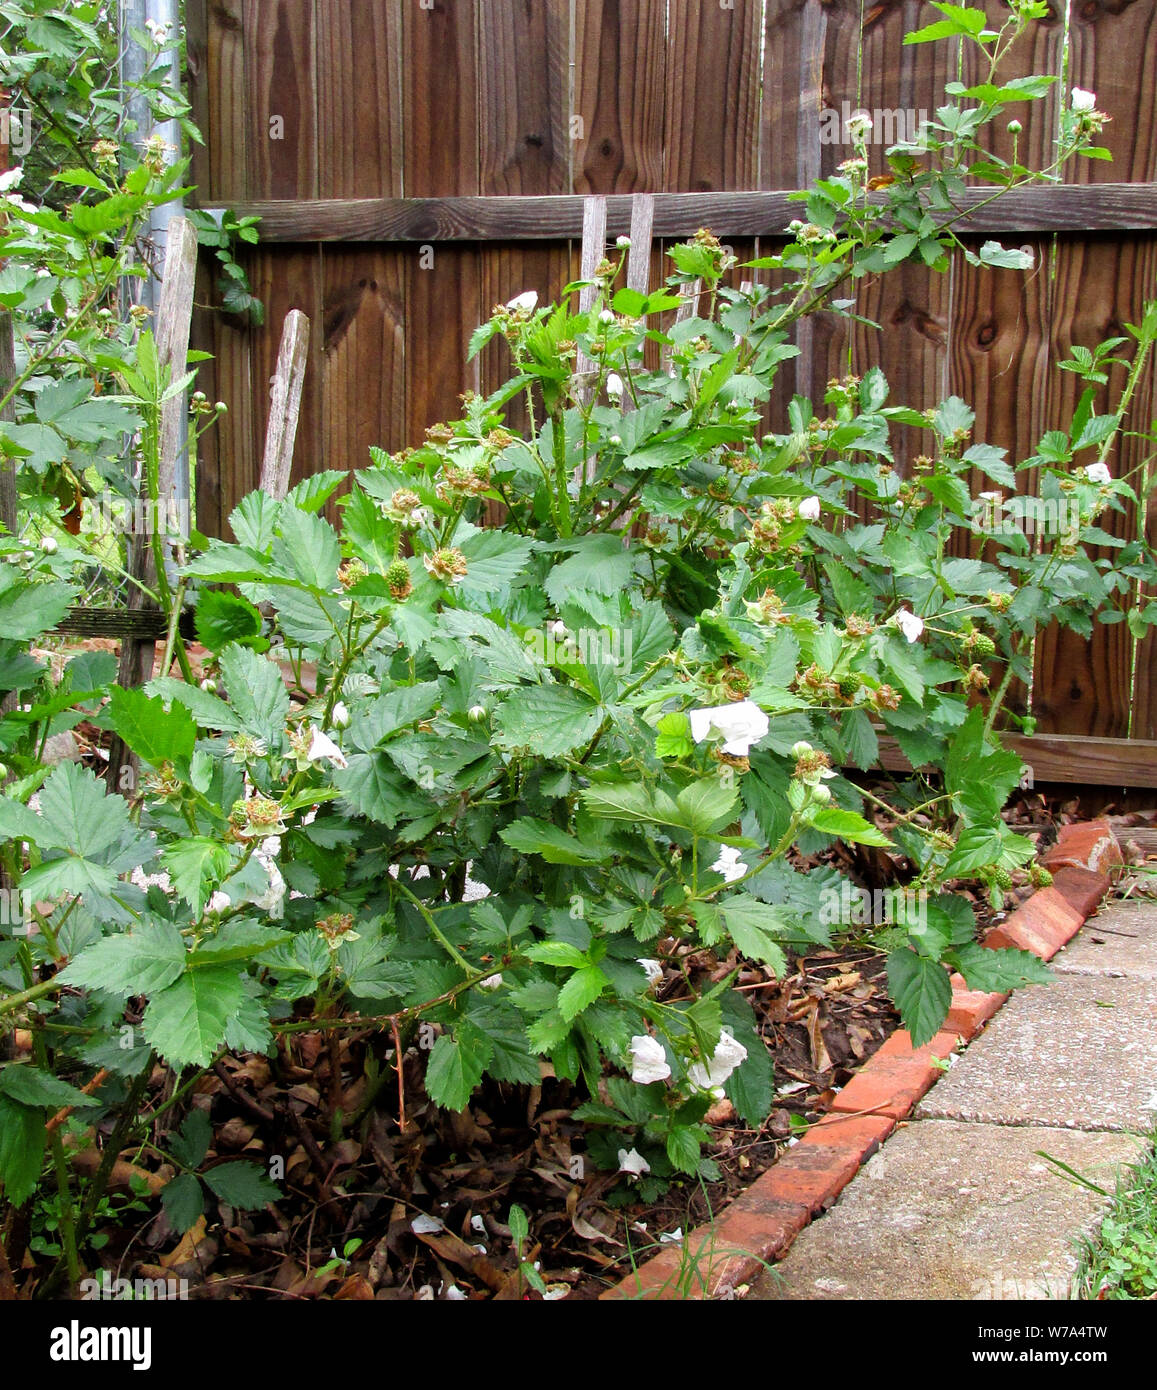 A small trellised blackberry bush shows large white spring blossoms after a rain shower. Stock Photo